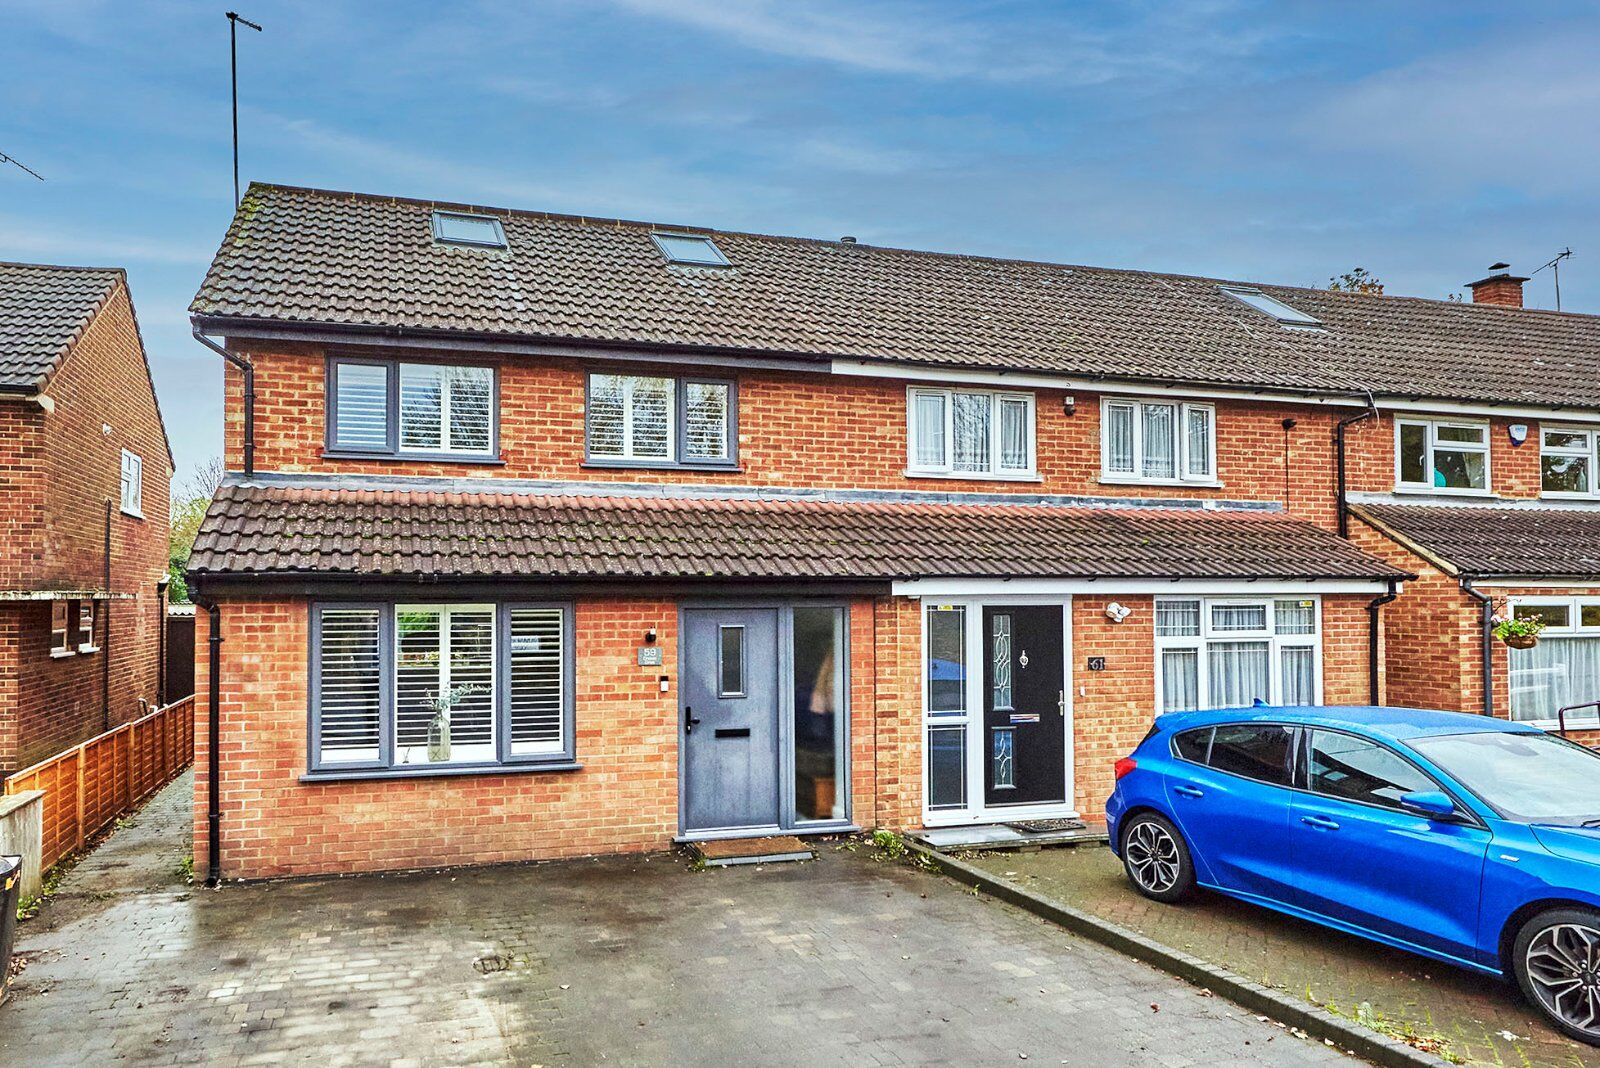 3 bedroom end terraced house for sale Drakes Drive, AL1, main image